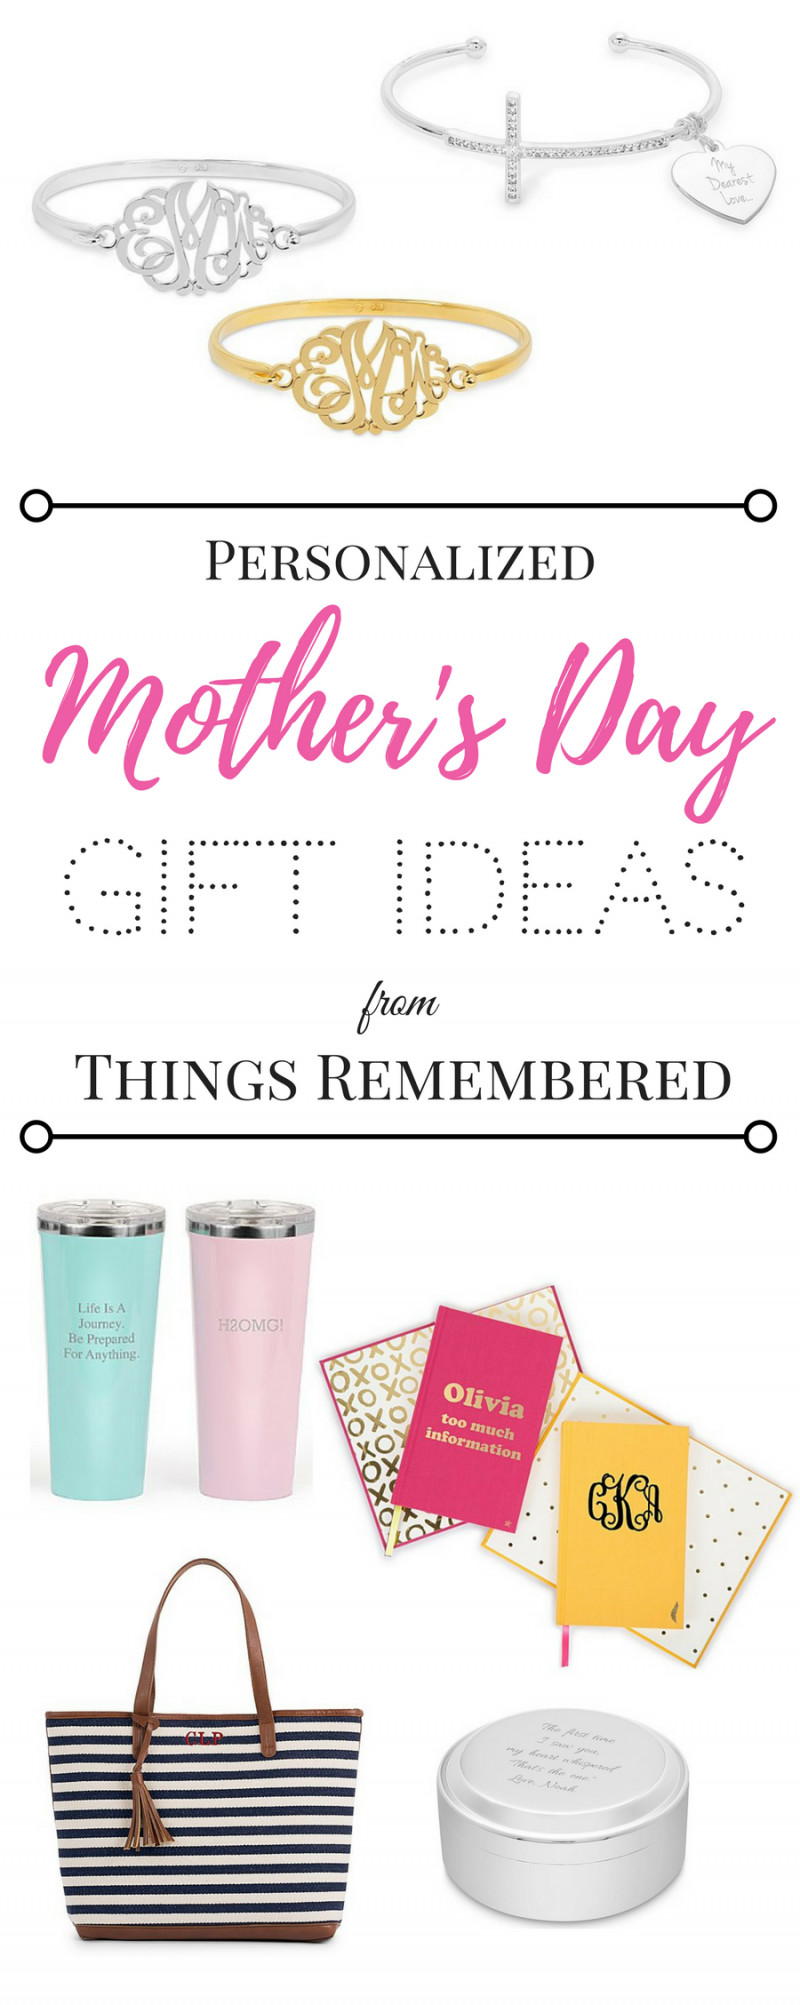 Personalized Mother'S Day Gift Ideas
 Personalized Mother s Day Gift Ideas from Things